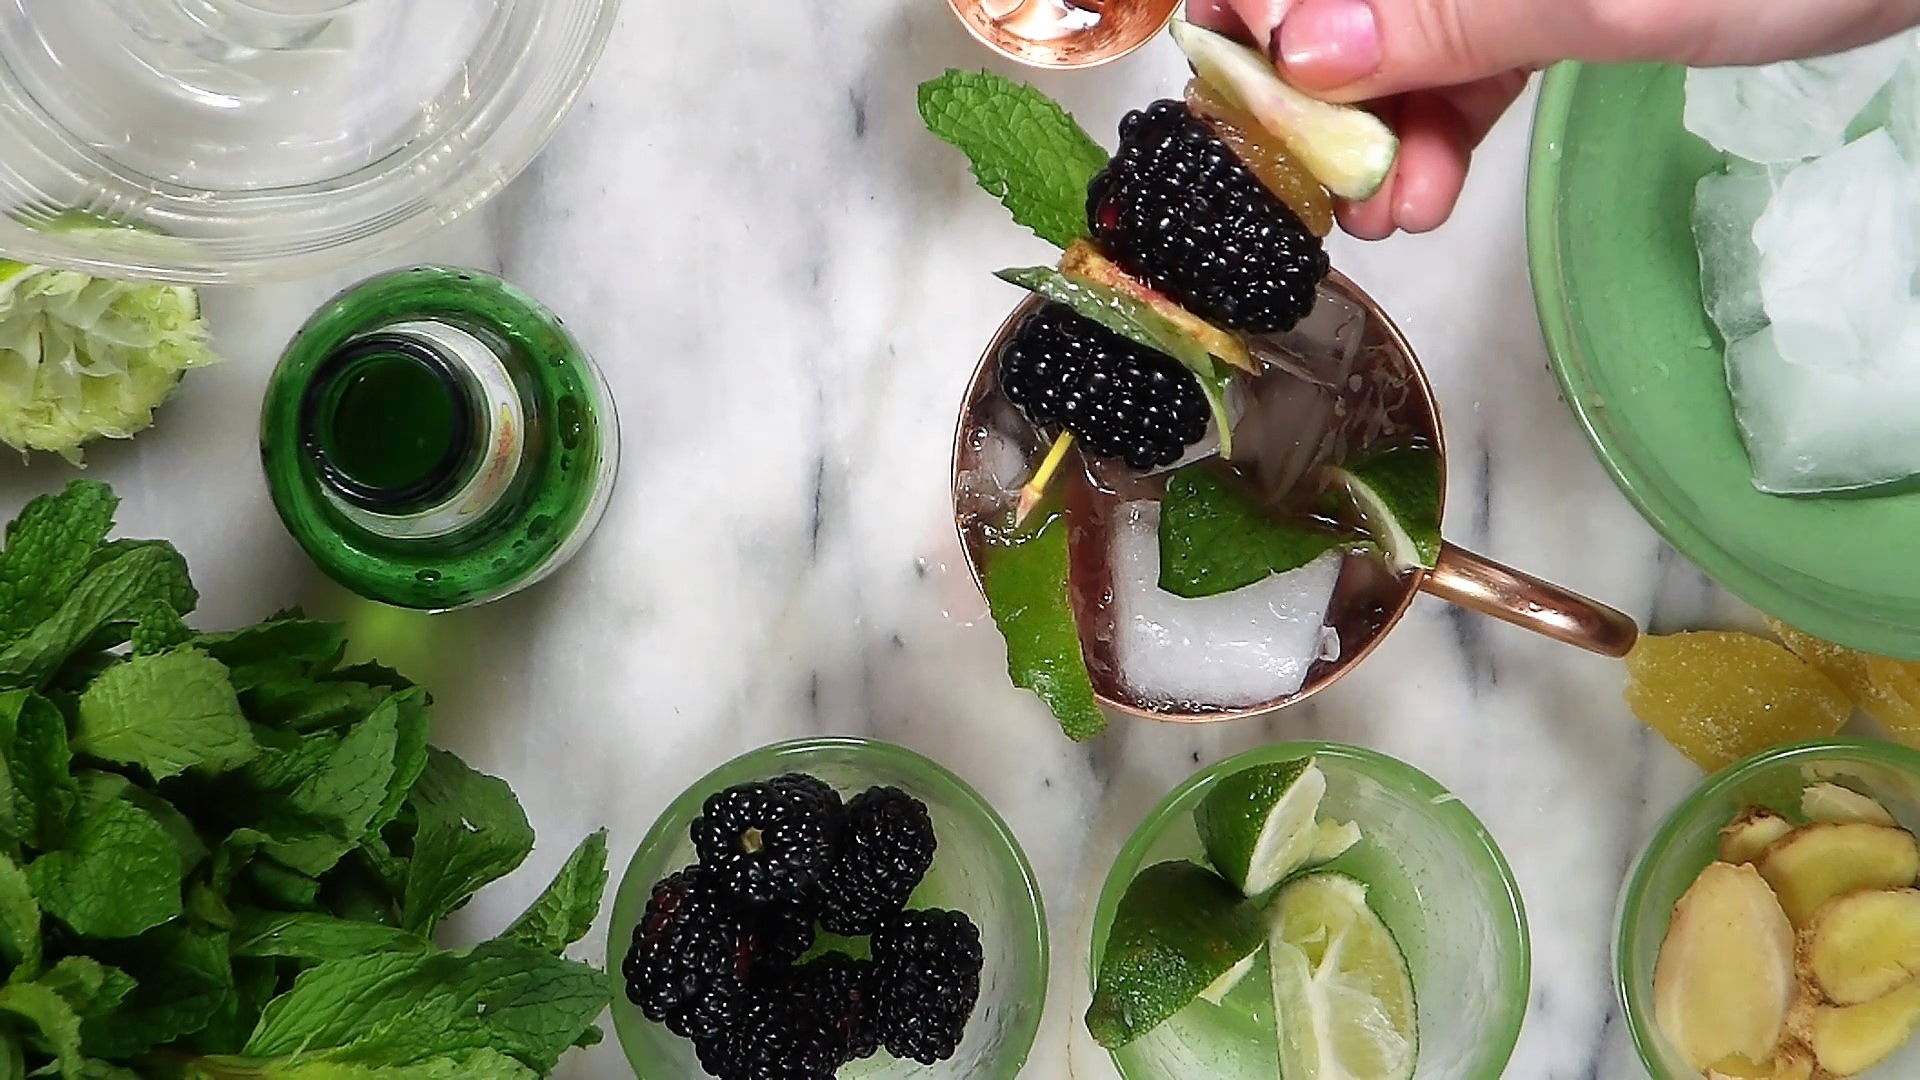 IMPROVE YOUR BARTENDING GAME: HOW TO PERFECT THE MOSCOW MULE